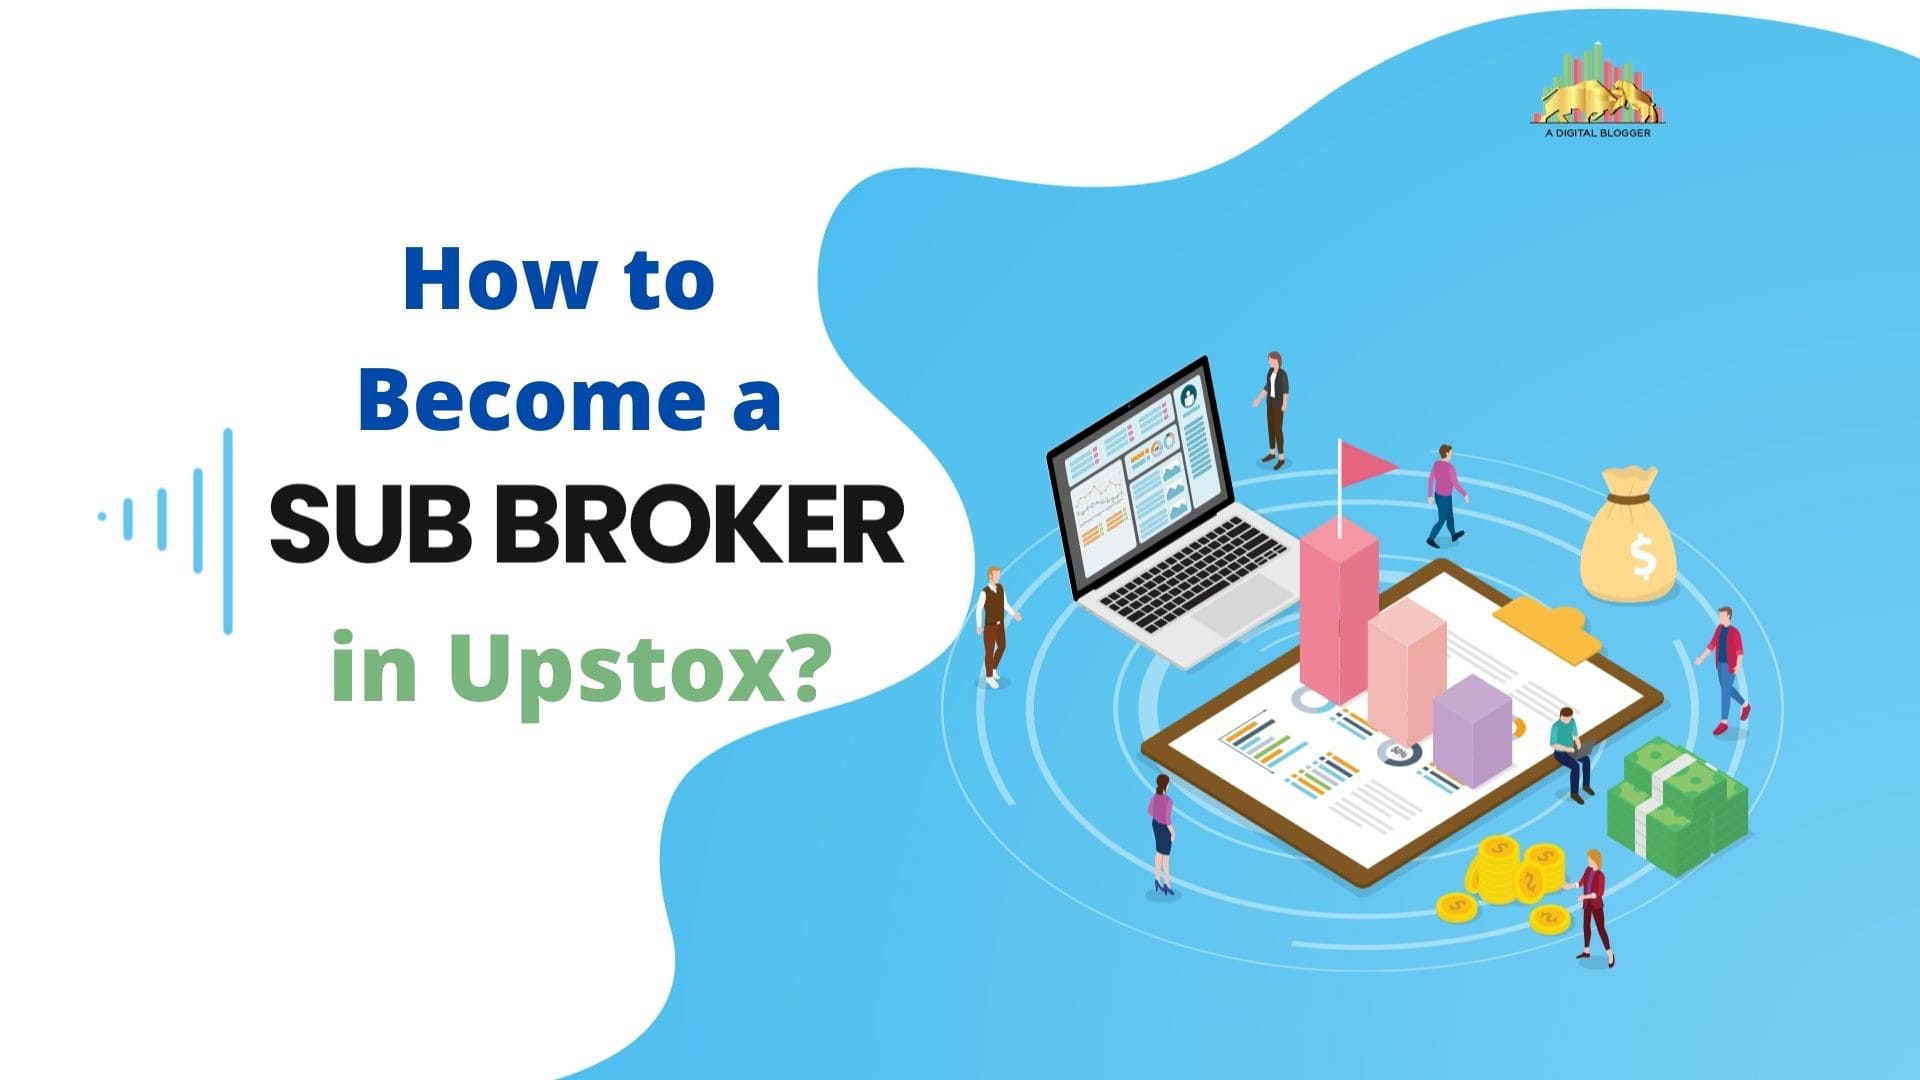 Know Everything in Detail About How to Become a Sub Broker in Upstox